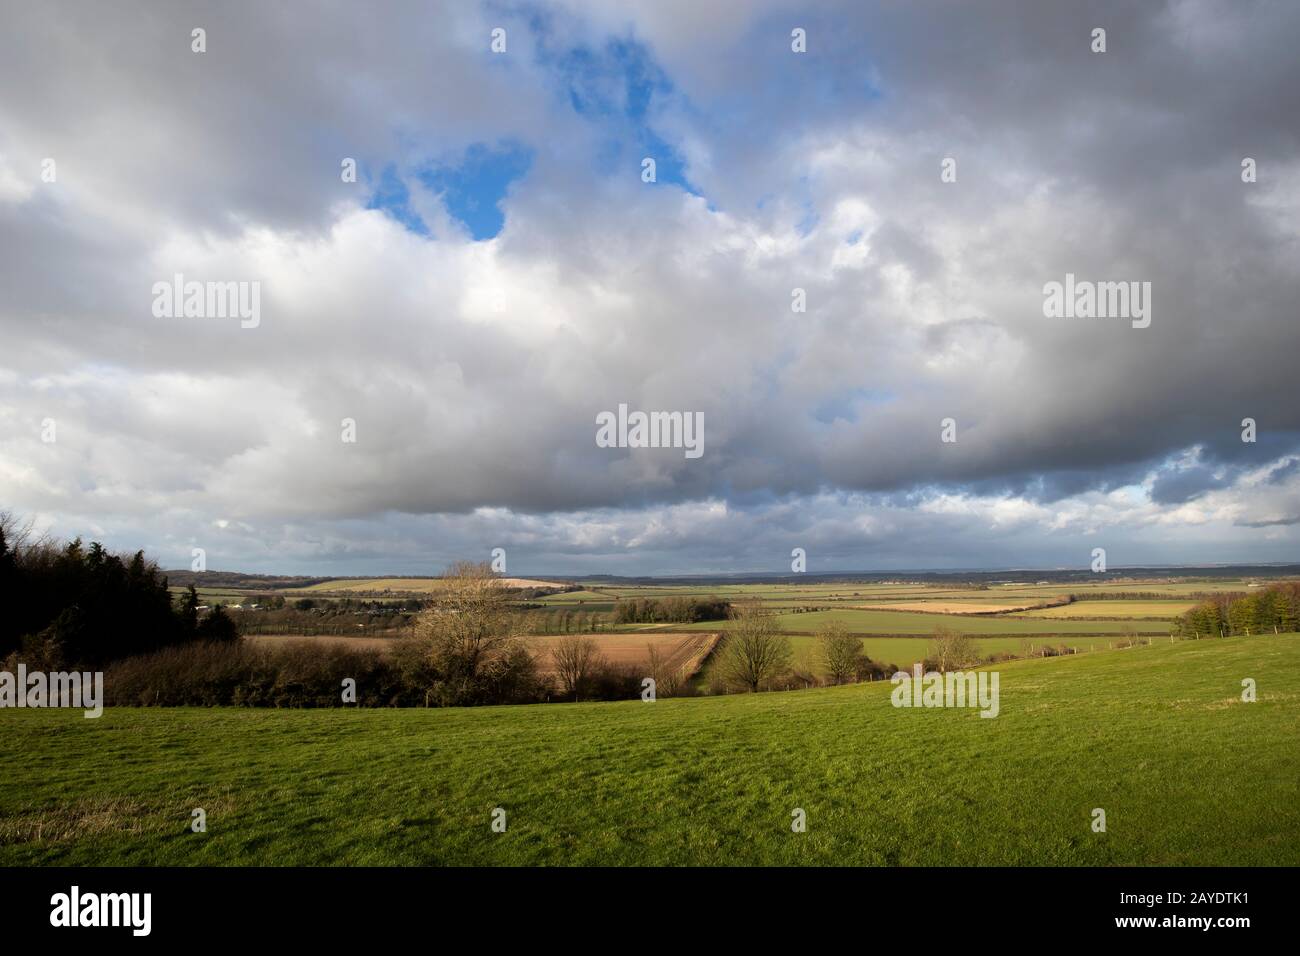 Rain clouds over farmland fields in the rural county of Hampshire Stock Photo